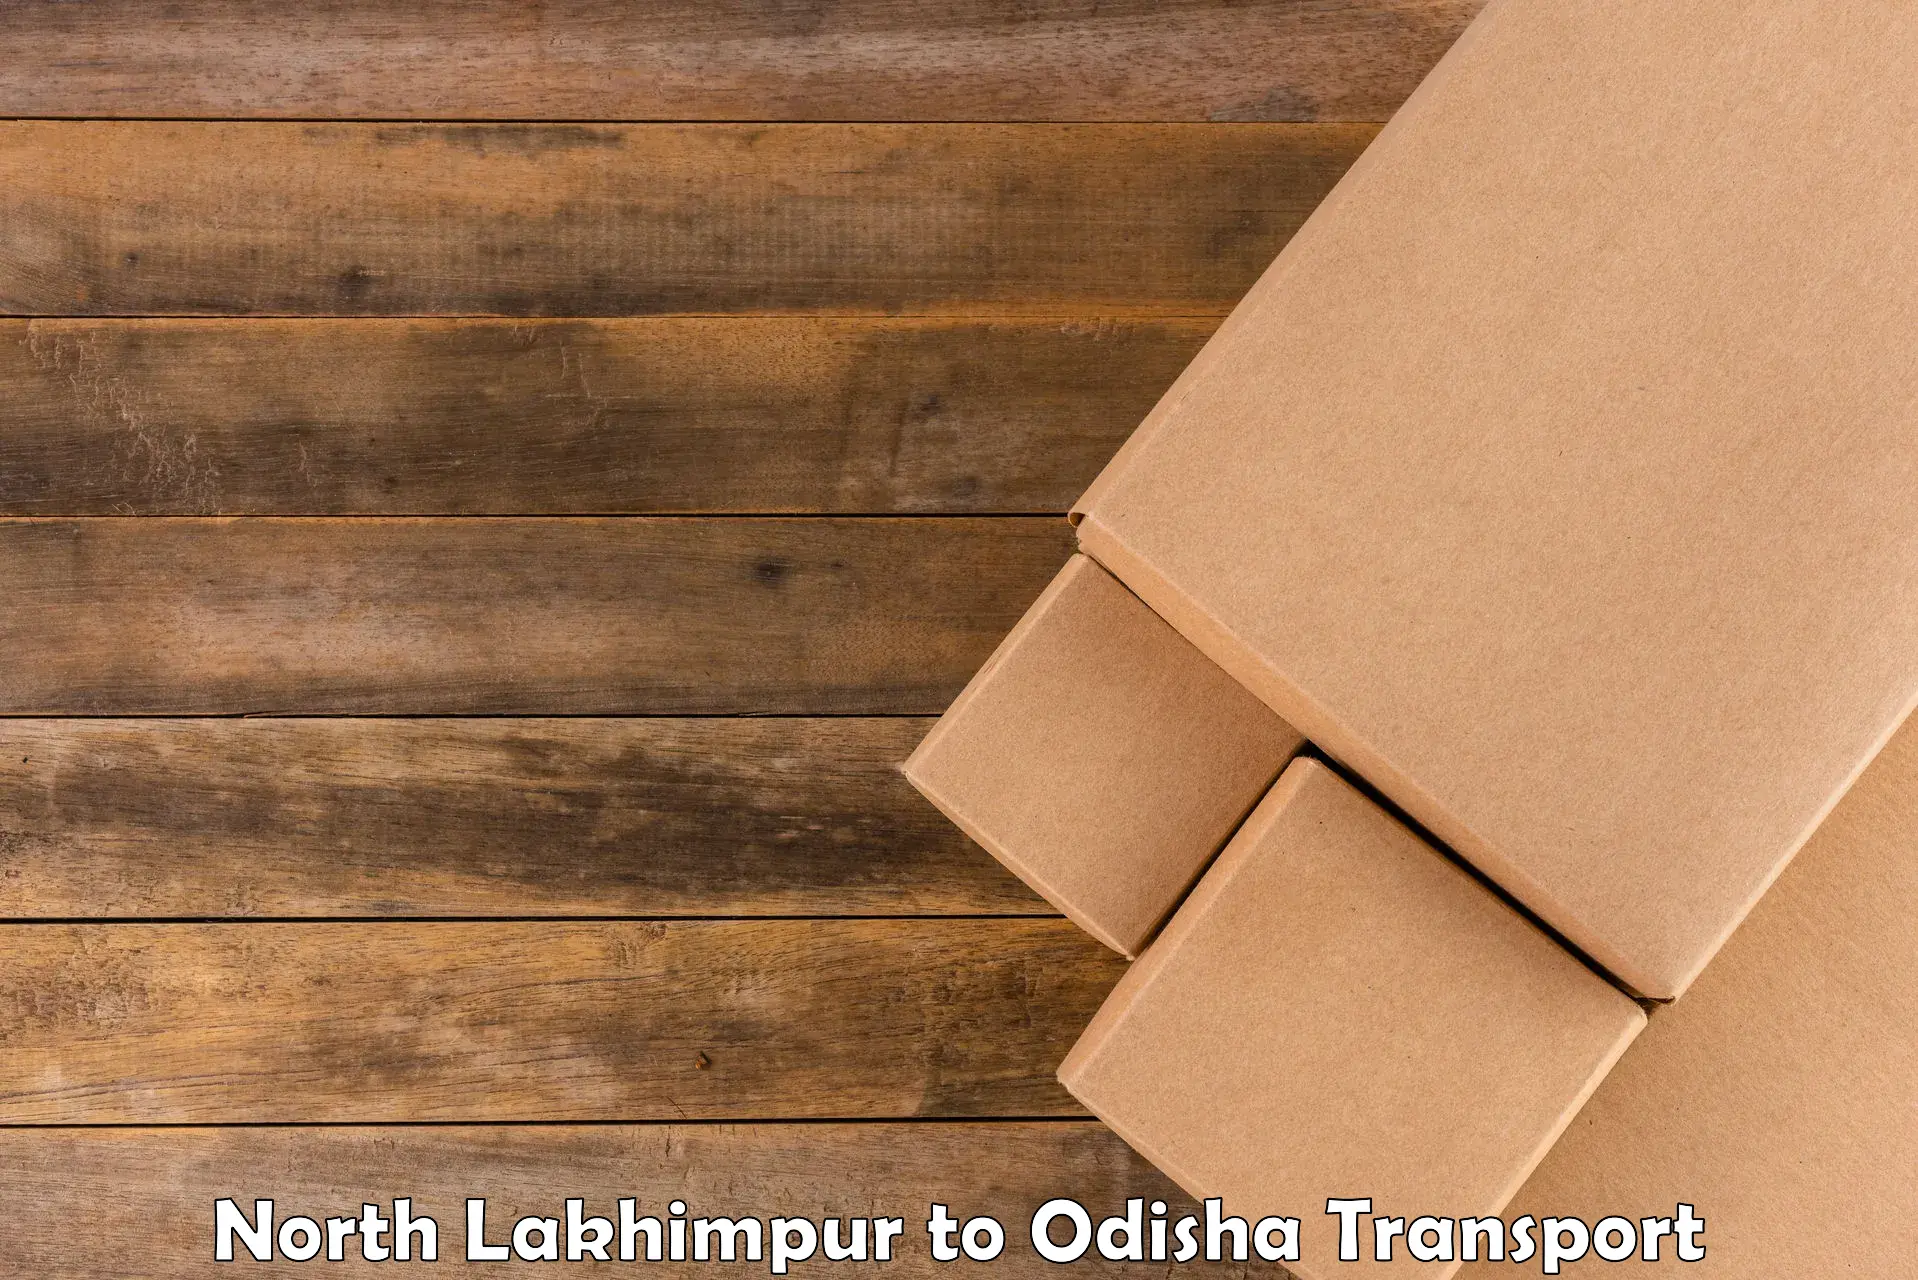 Package delivery services North Lakhimpur to Jharsuguda